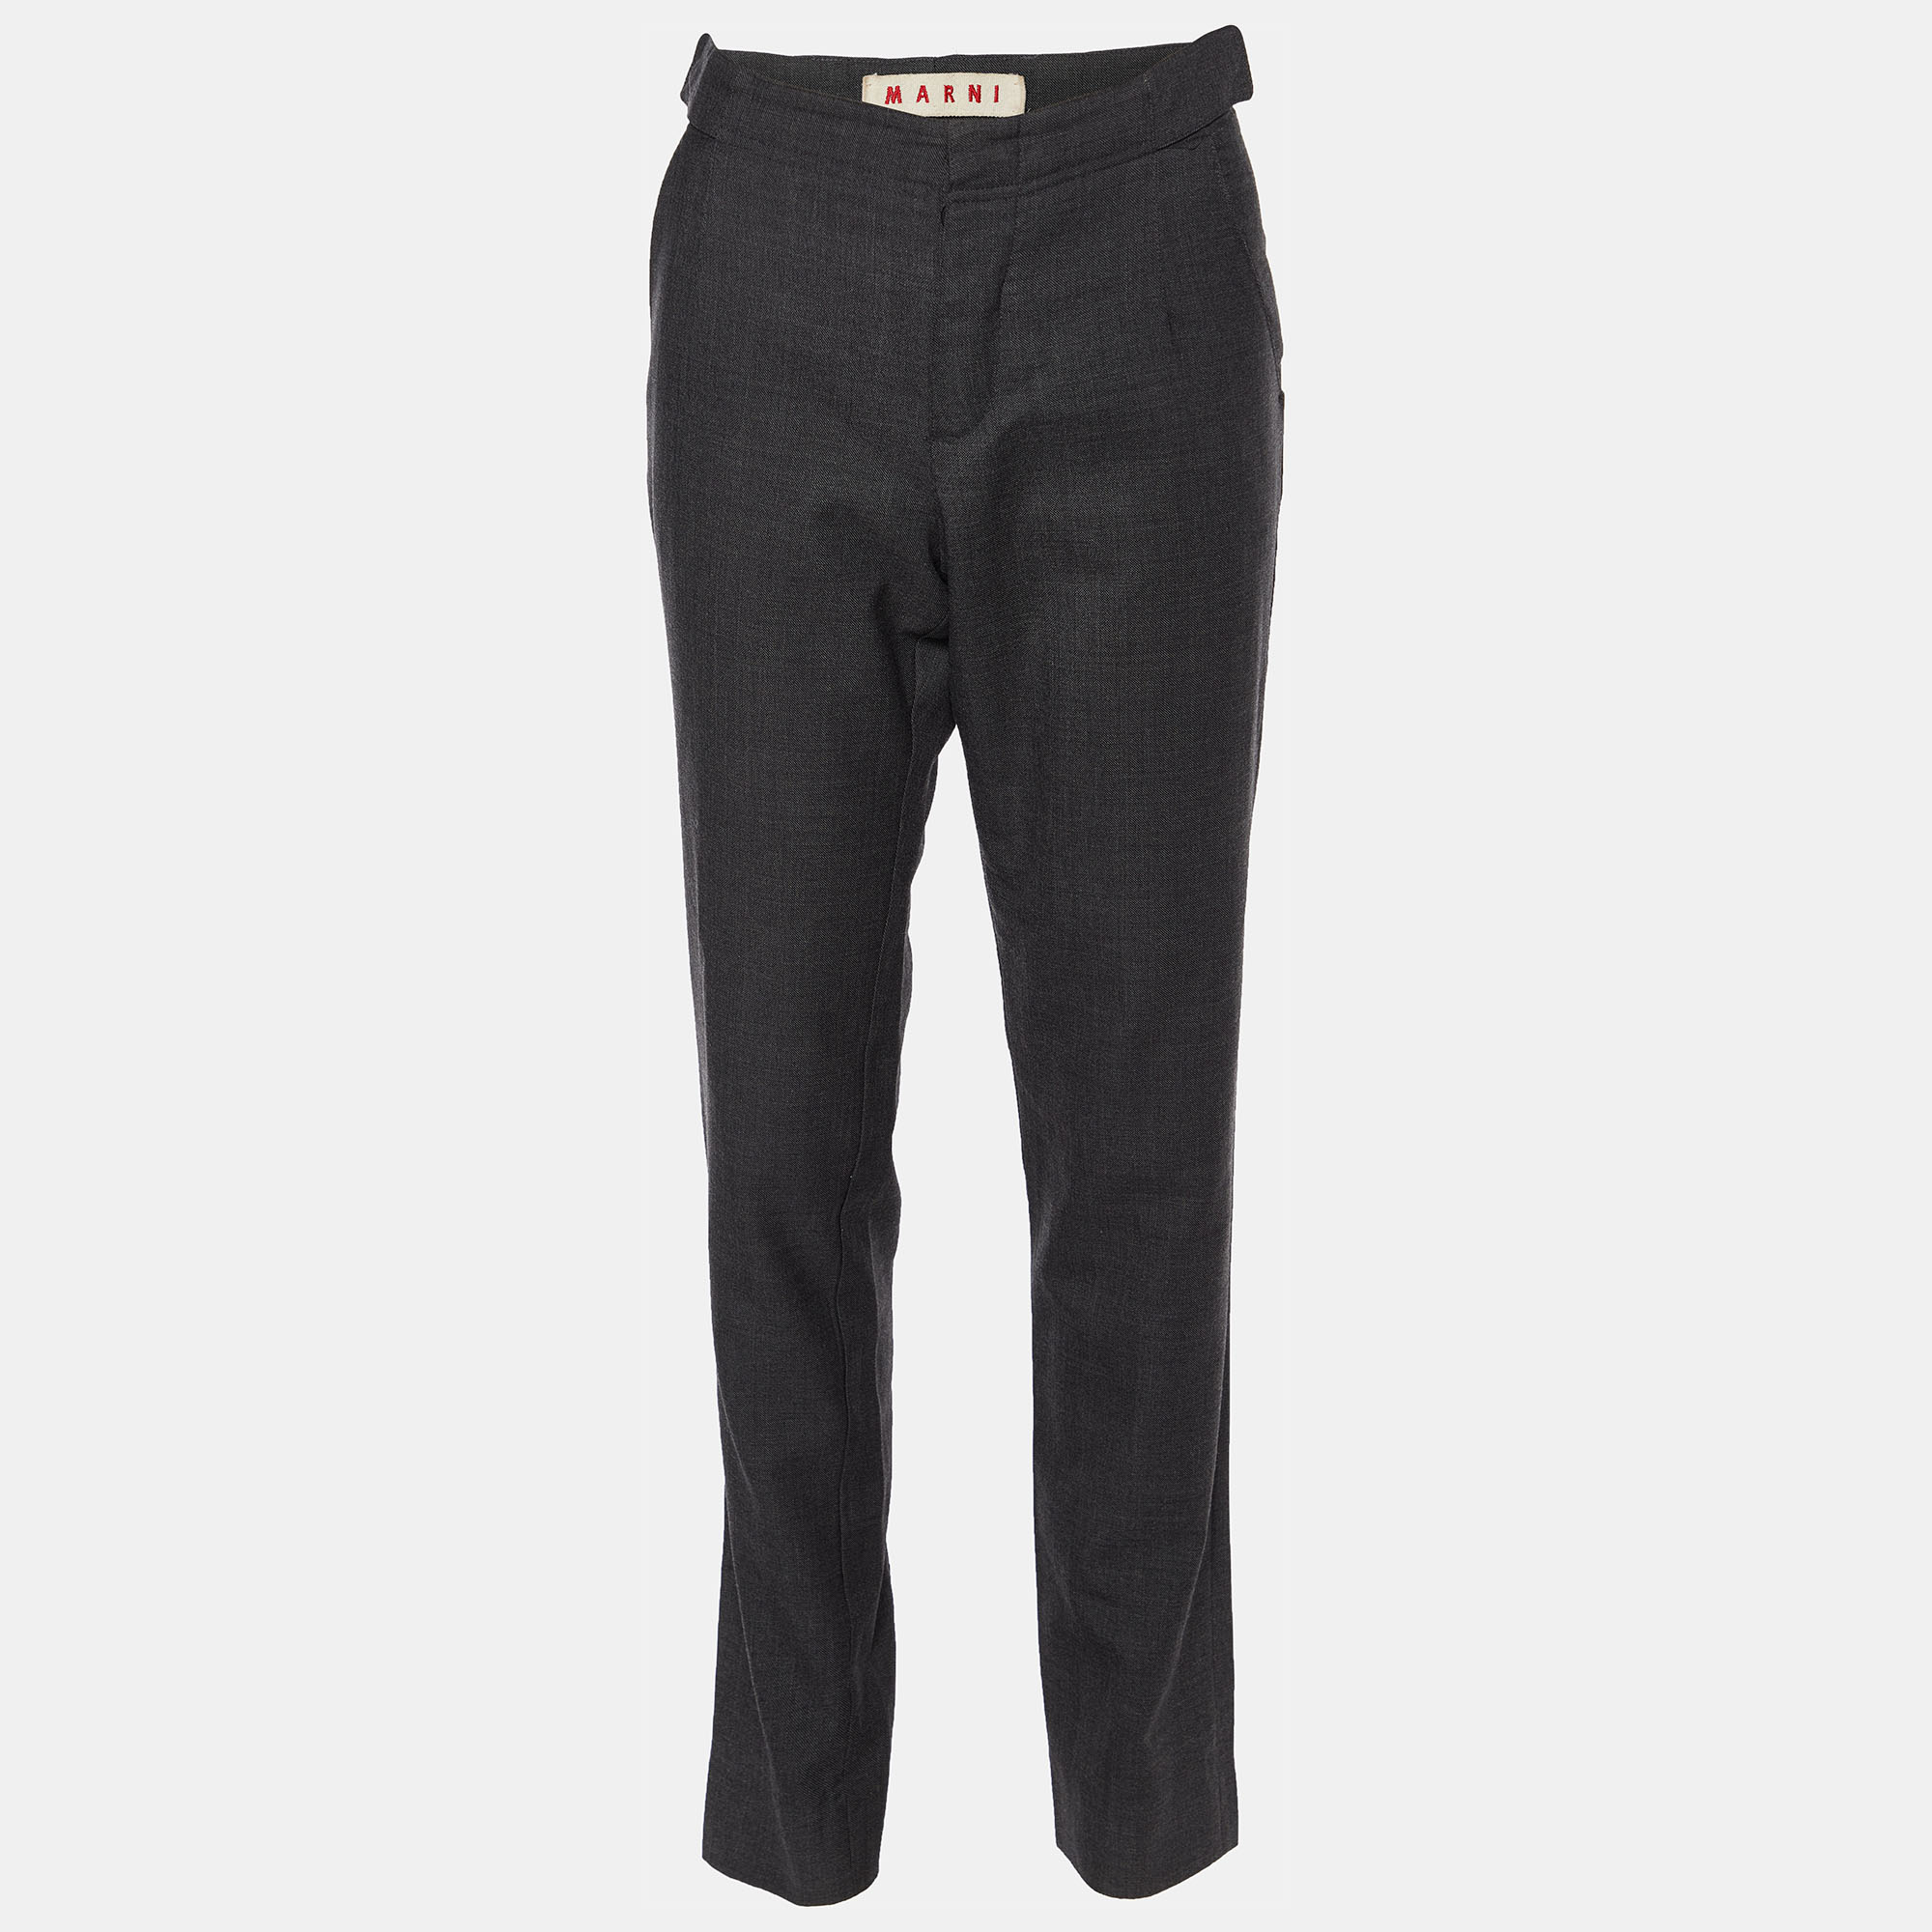 Pre-owned Marni Charcoal Grey Wool Tapered Leg Pants S